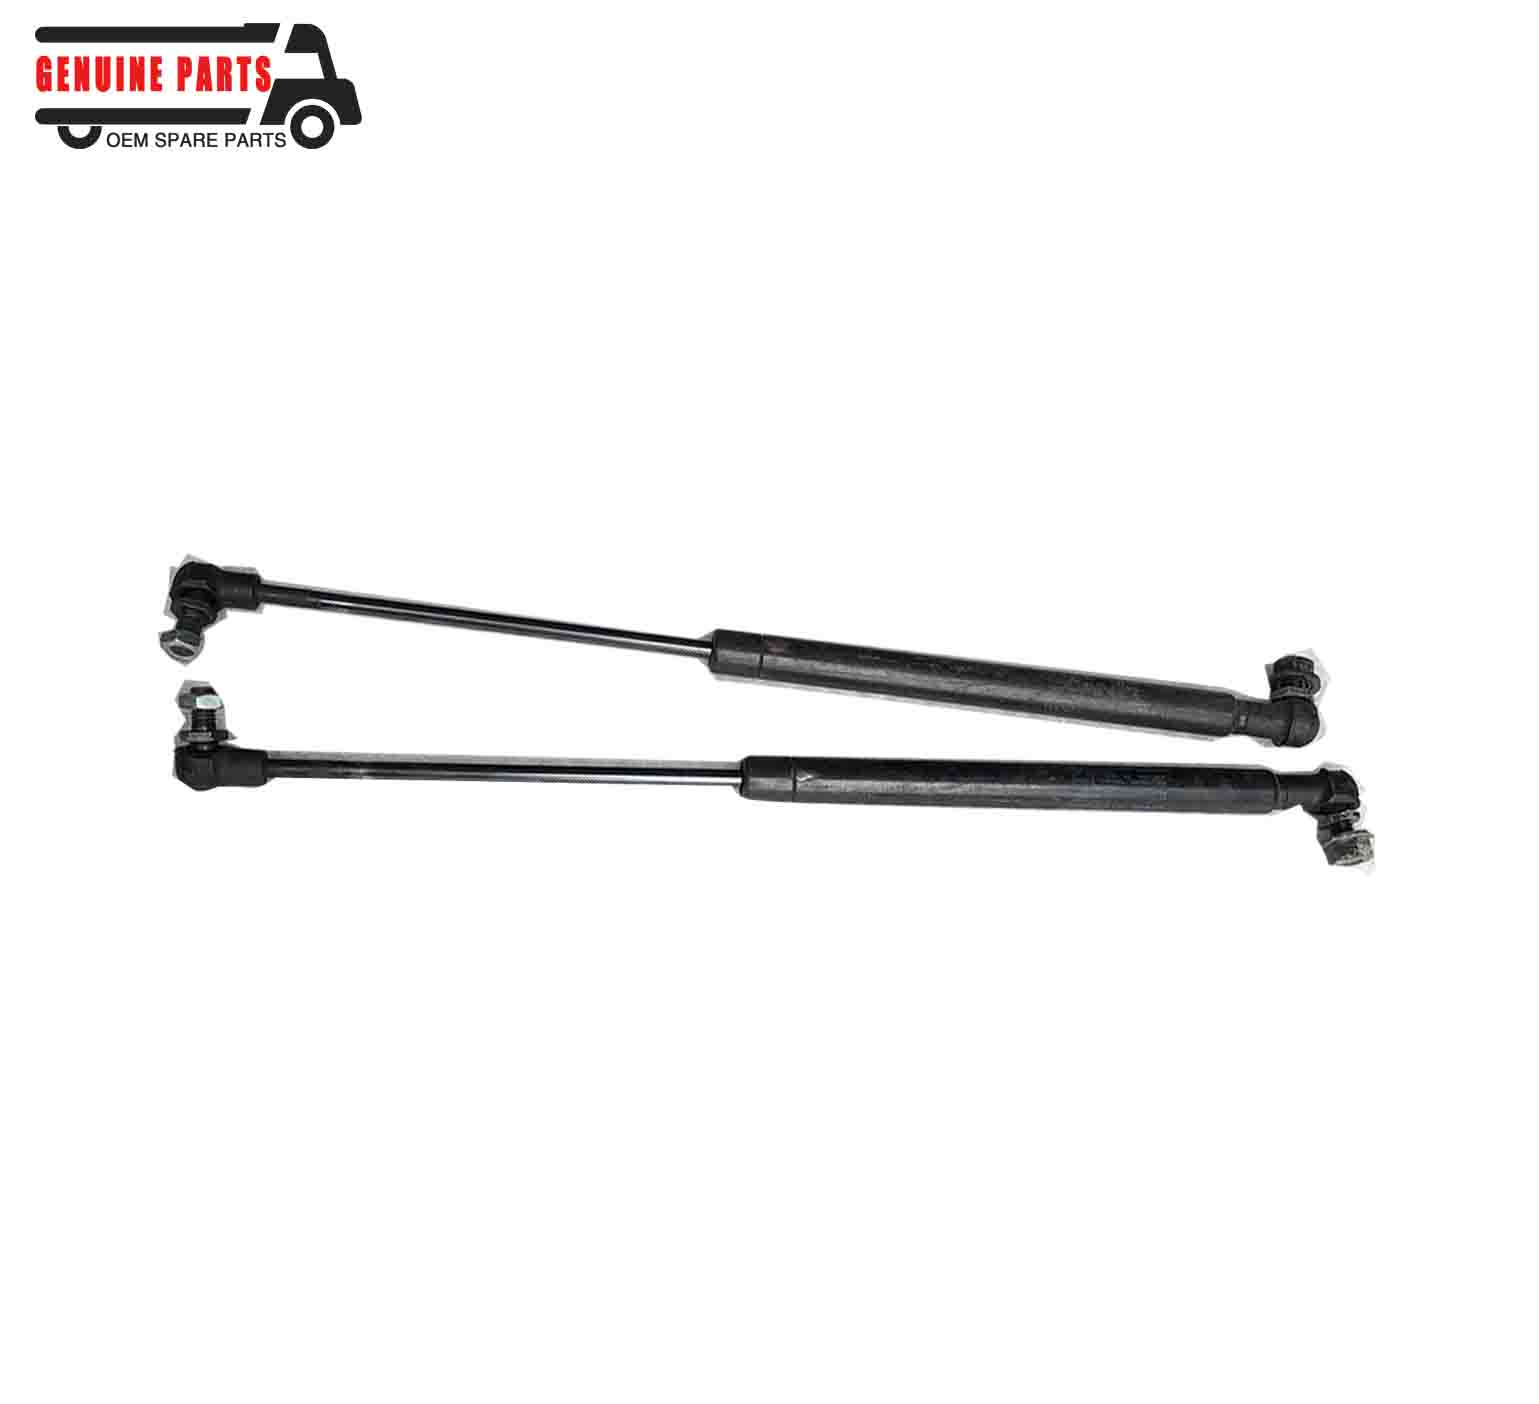 China Guangzhou 1447971 Used Sleeper Pole Used Truck For Scania Truck For Other Auto Parts